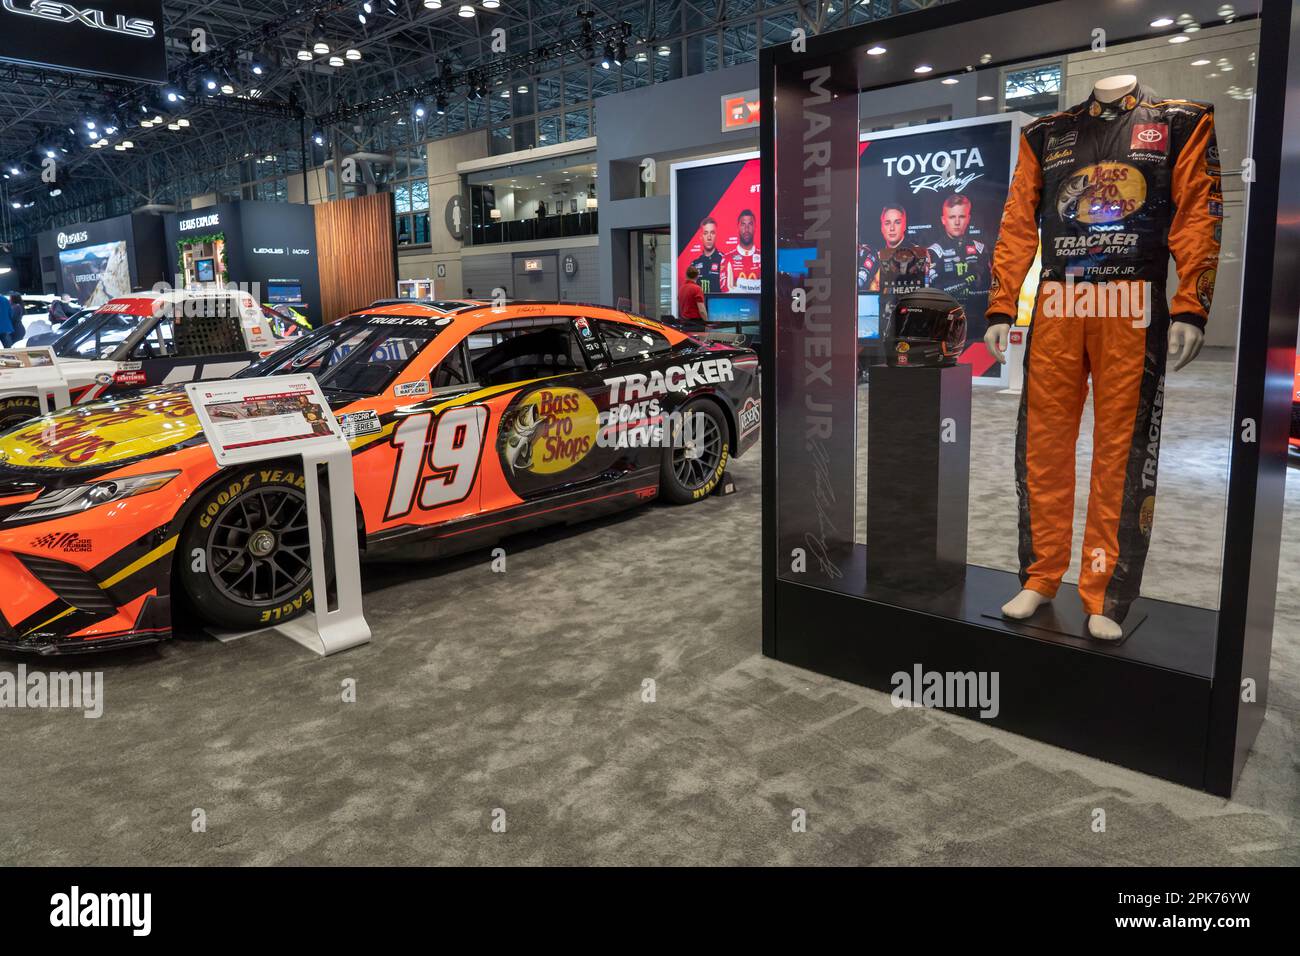 New York, United States. 05th Apr, 2023. NEW YORK, NEW YORK - APRIL 05: A Joe Gibbs Racing #19 Camry Cup Car driven by Martin Truex Jr. seen at the International Auto Show press preview at the Jacob Javits Convention Center on April 5, 2023 in New York City. Credit: Ron Adar/Alamy Live News Stock Photo